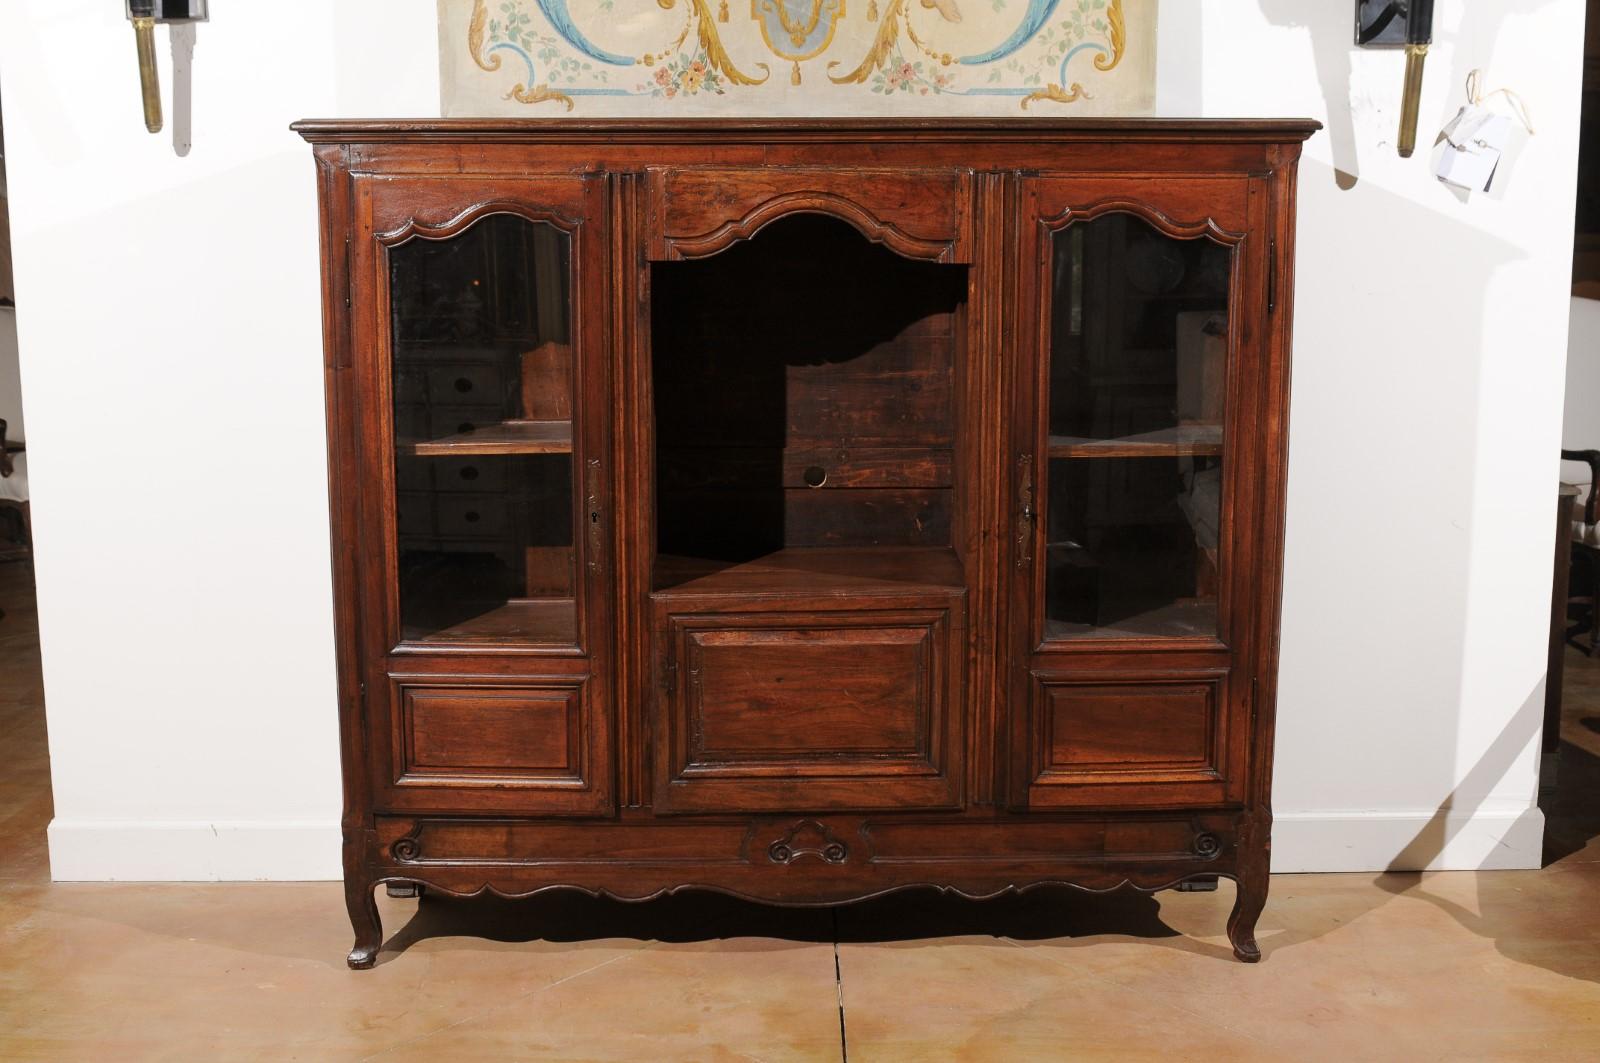 A French Provincial walnut bibliothèque from the late 18th century, with glass doors and open shelf. Created in France during the last quarter of the 18th century, this walnut bookcase features a perfectly harmonious façade made of two glass doors